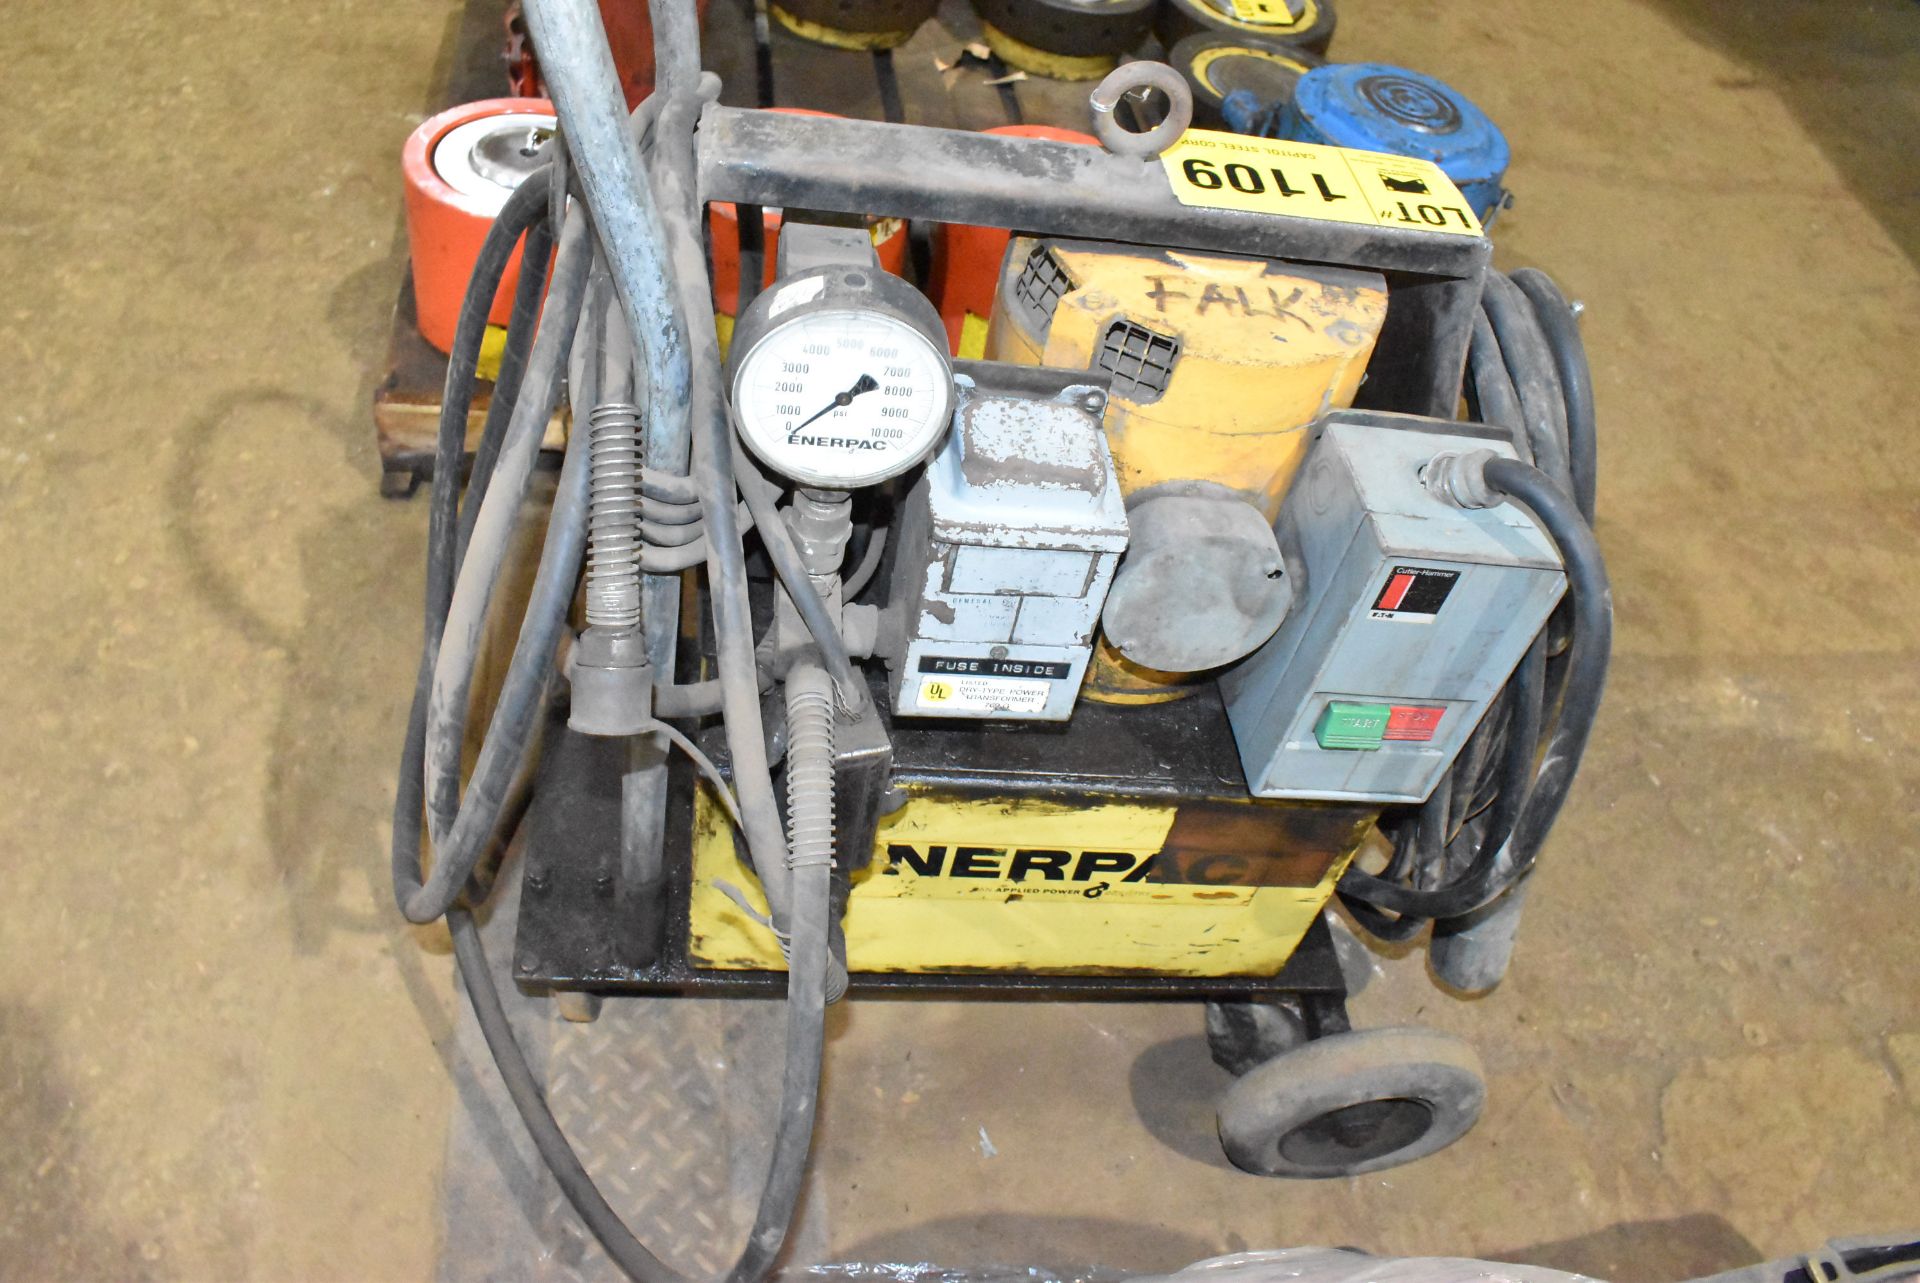 ENERPAC PER5045 3 HP PORTABLE HYDRAULIC POWER UNIT - Image 4 of 4